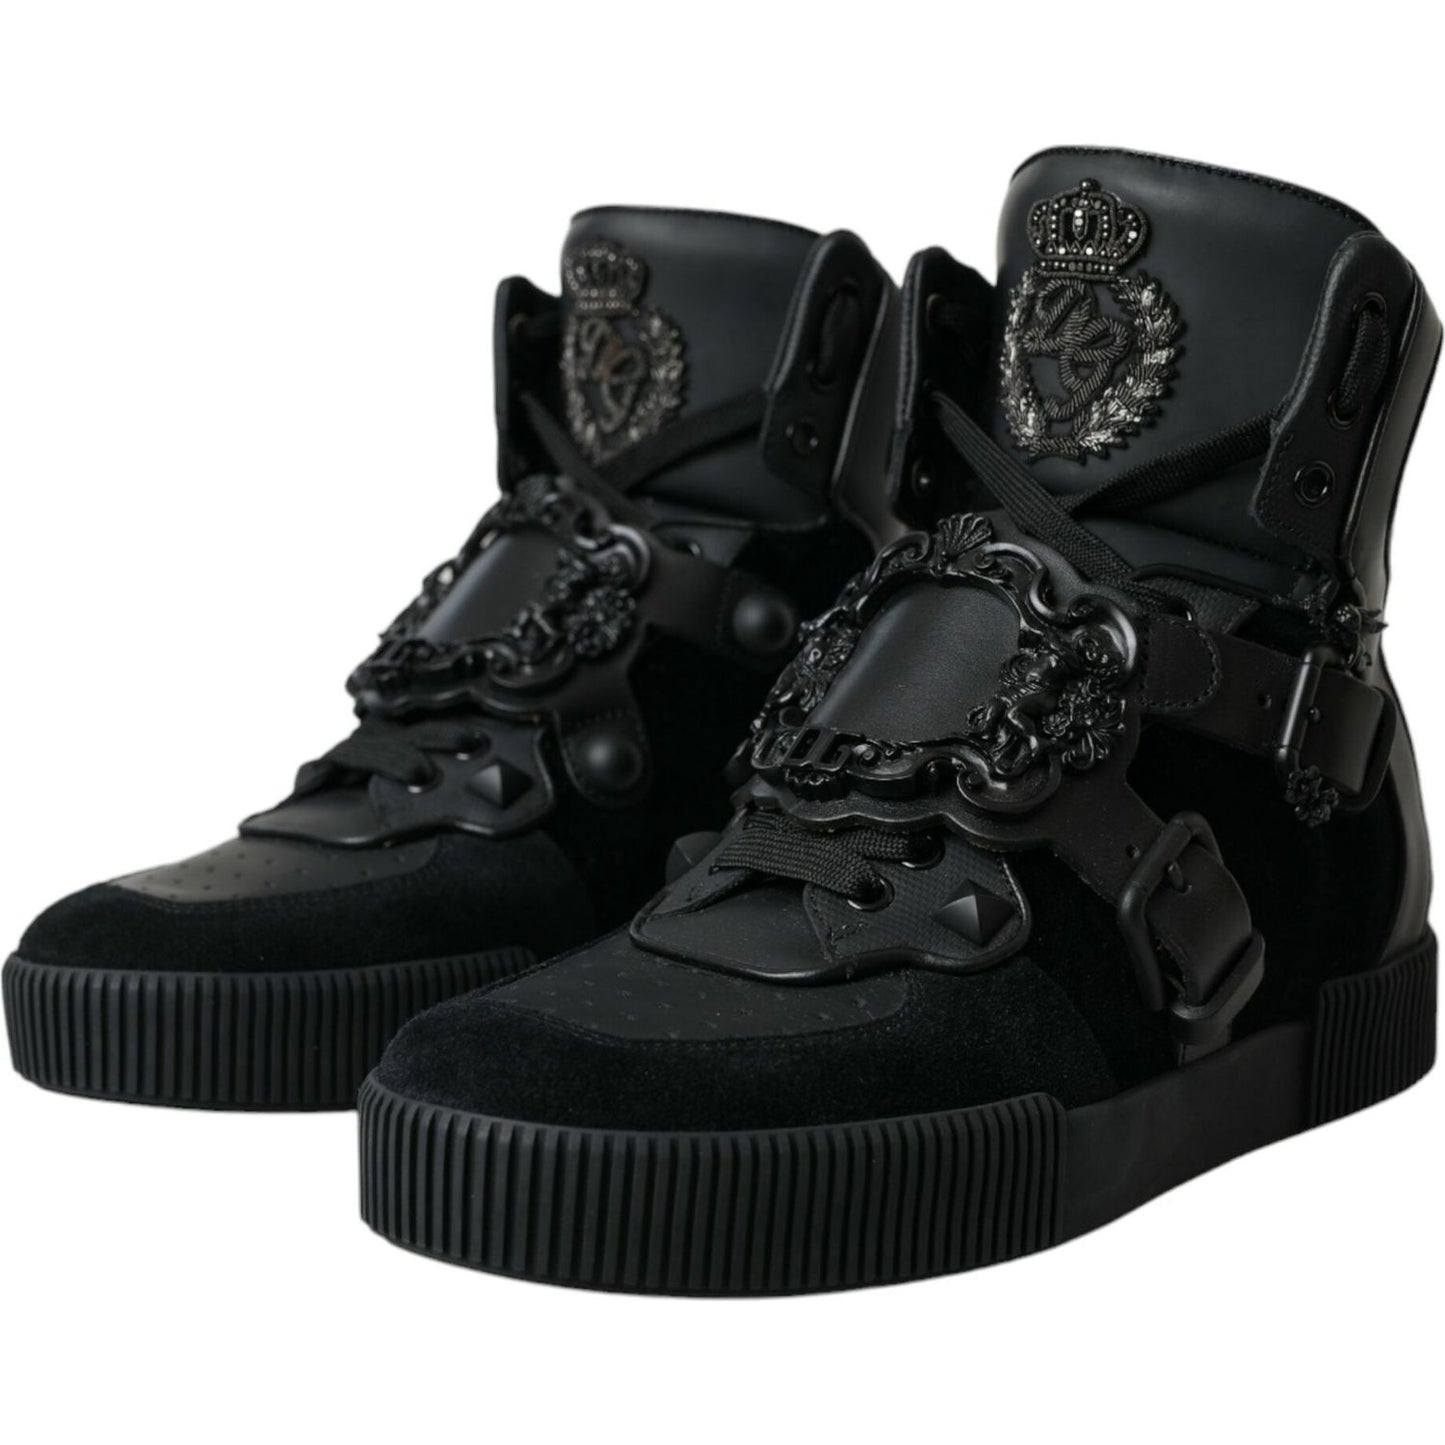 Dolce & Gabbana Black Logo Leather Miami High Top Sneakers Shoes black-logo-leather-miami-high-top-sneakers-shoes